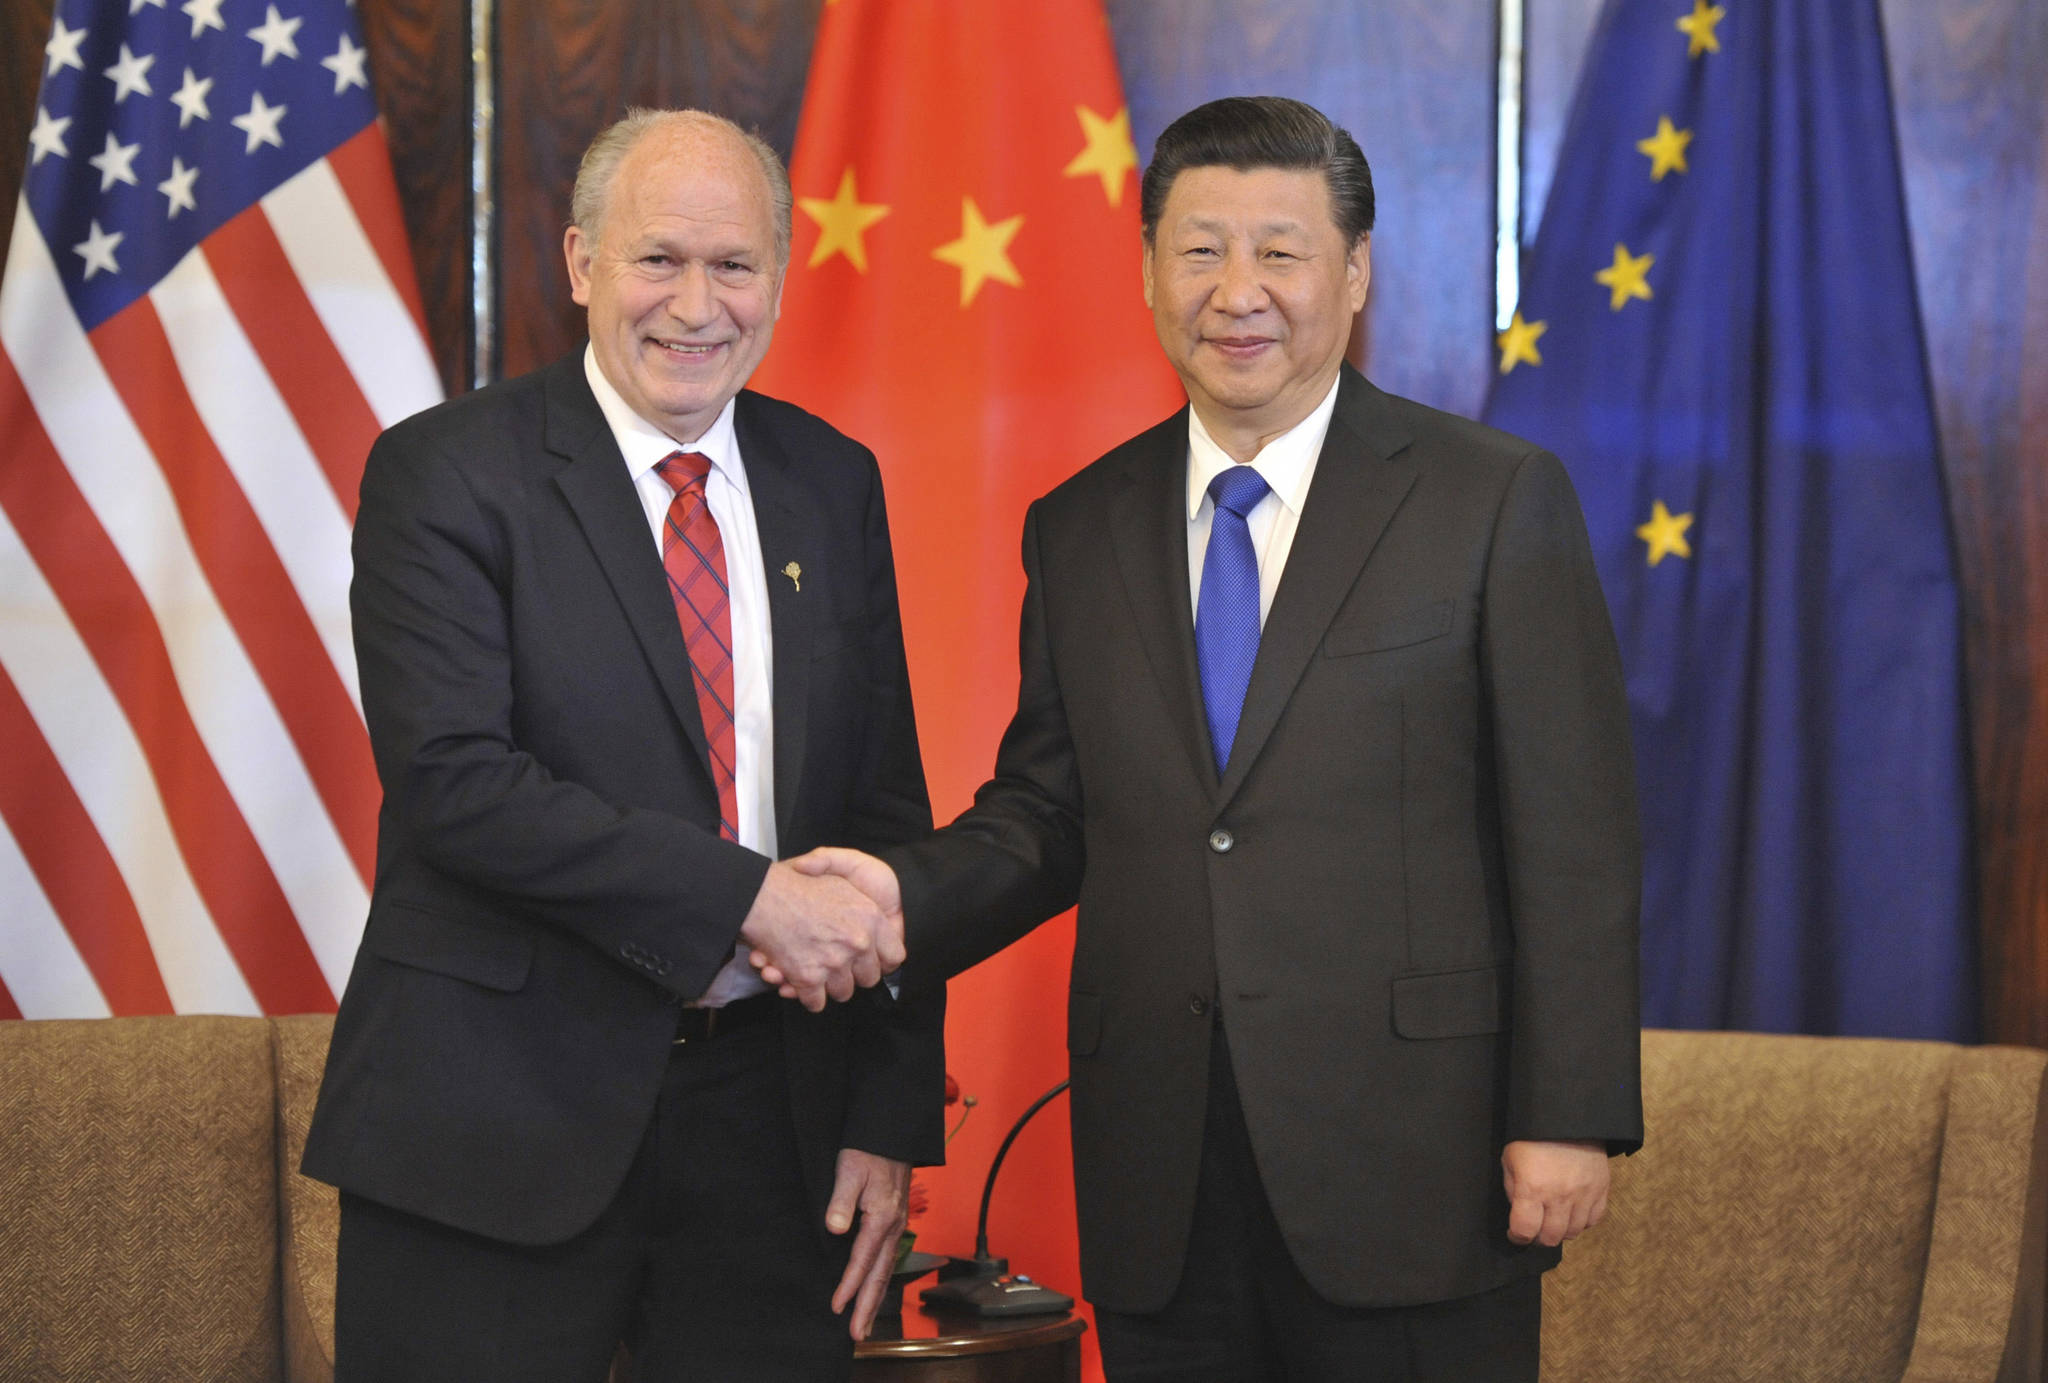 Chinese President Xi Jinping, right, and Alaska Governor Bill Walker greet each other at a meeting Friday, April 7, 2017, in Anchorage, Alaska. Xi requested time with Gov. Walker Friday night as the Chinese delegation’s plane made a refueling stop in Alaska’s largest city following meetings with President Donald Trump in Florida. (AP Photo/Michael Dinneen)